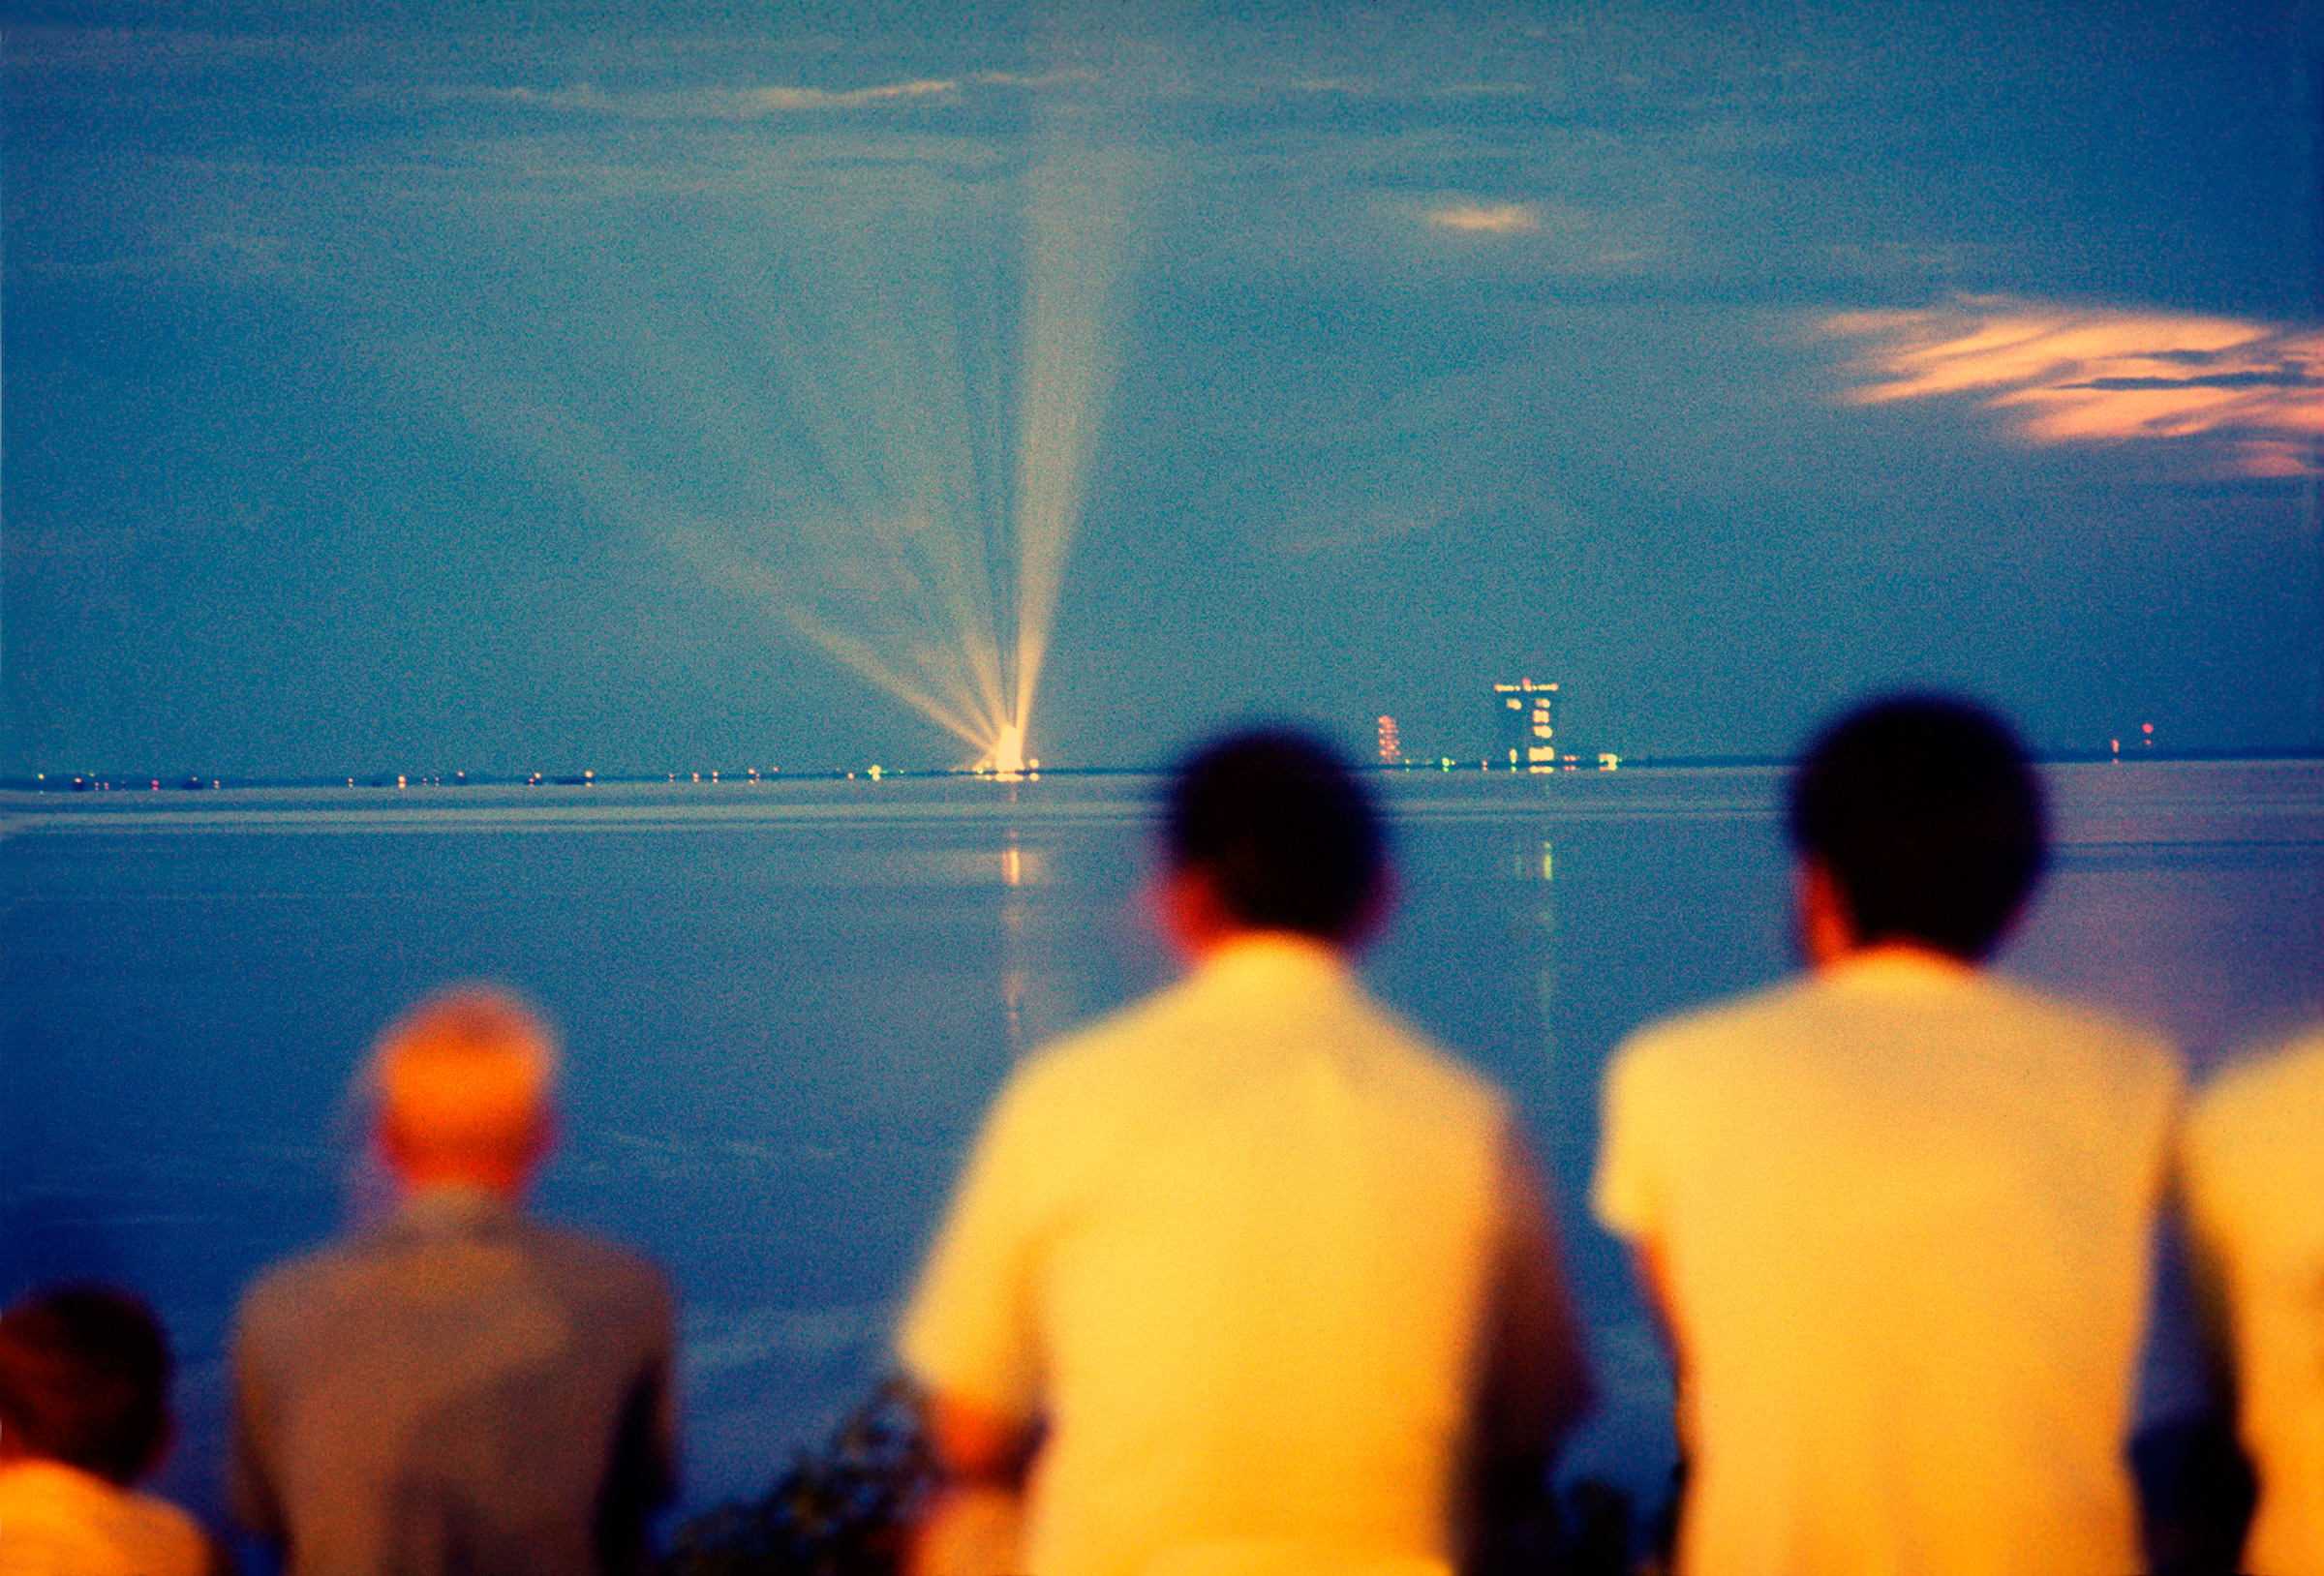 "At around dusk," says Burnett, "NASA put the lights of the launch pad on." (David Burnett —Contact Press Images for TIME)